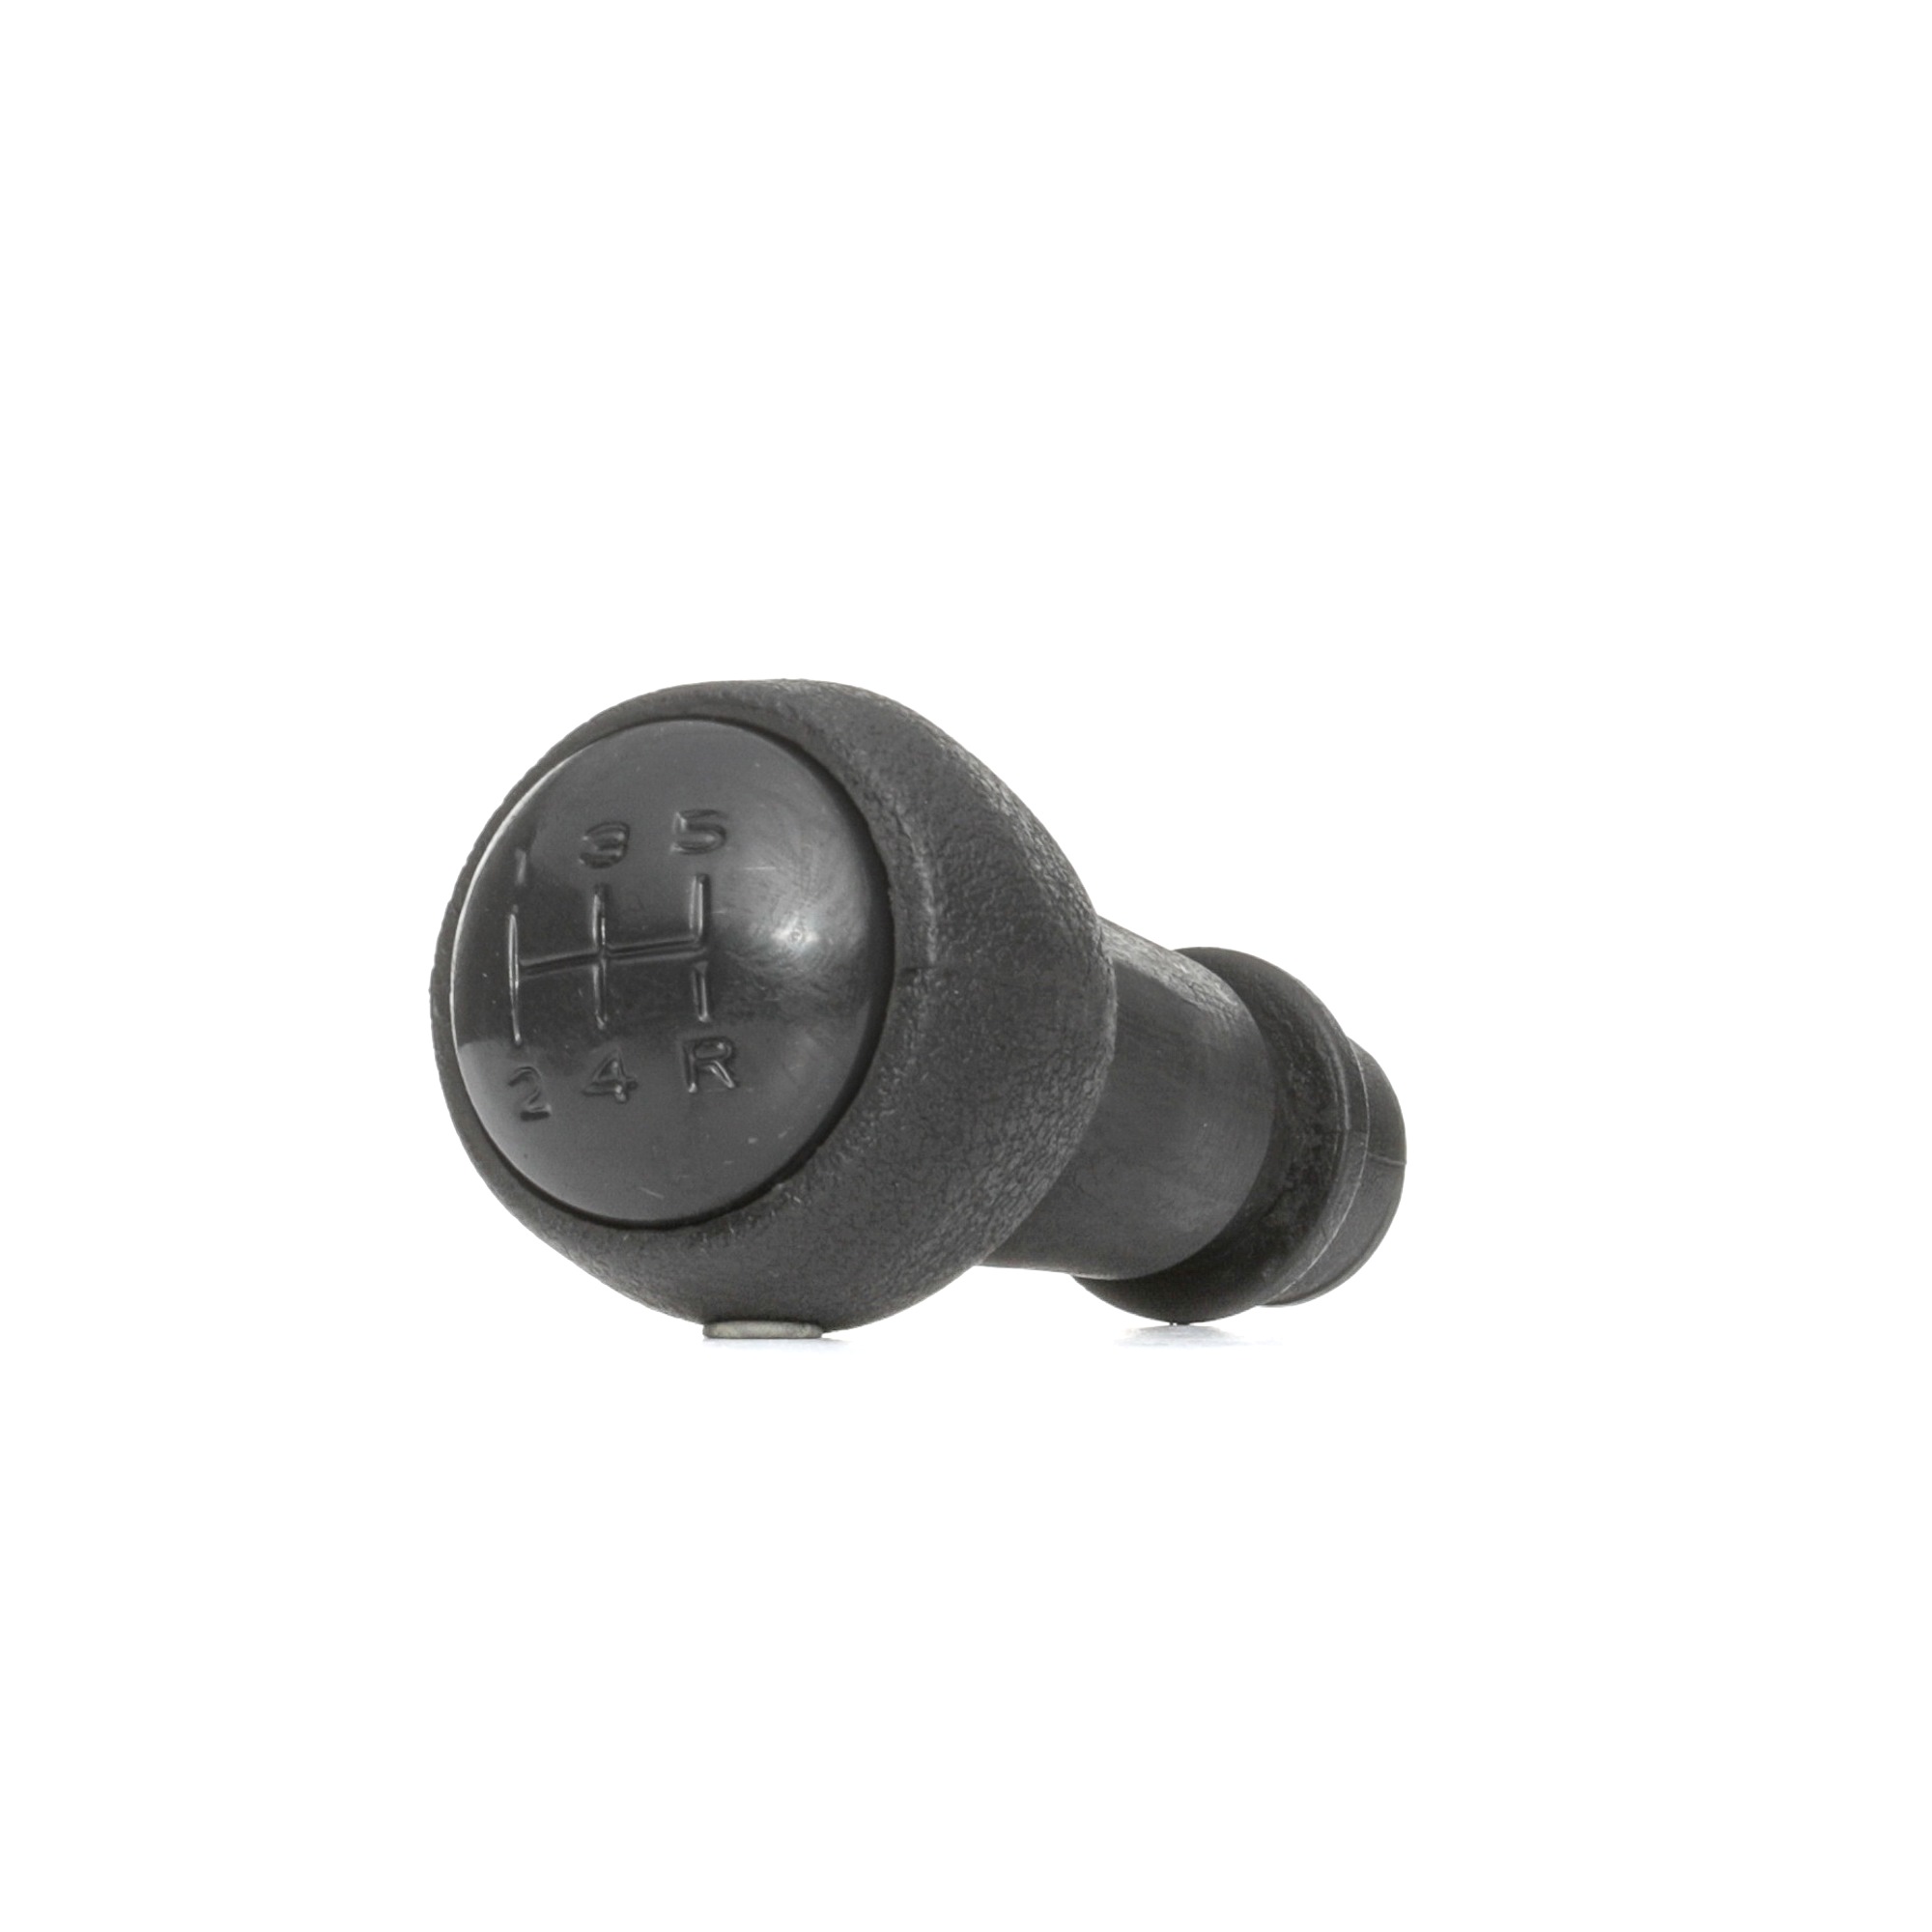 3RG 25214 PEUGEOT Gear shift knobs and parts in original quality